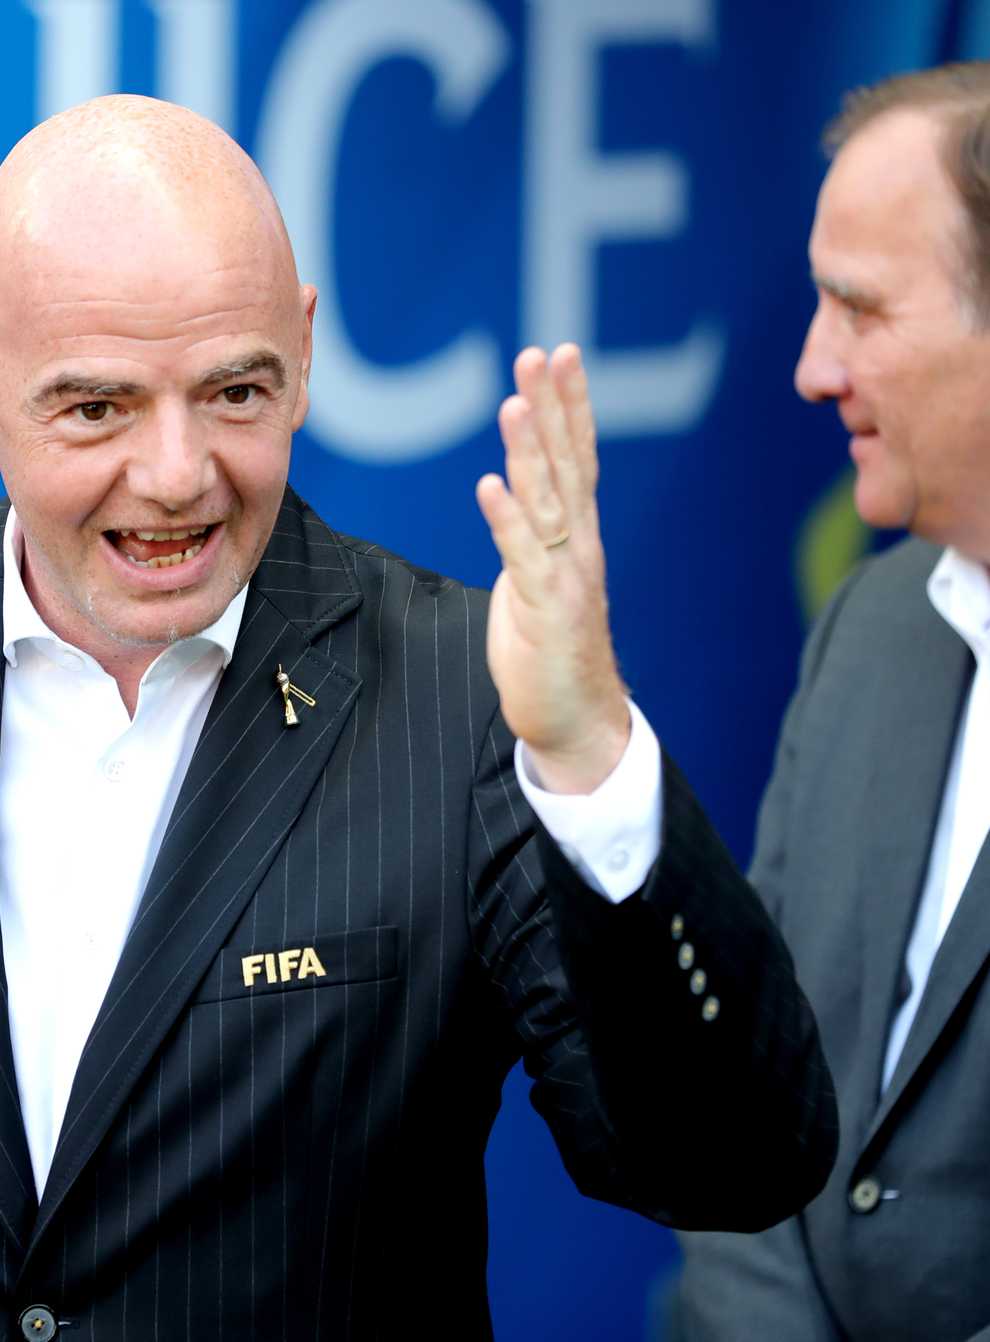 Gianni Infantino has been cleared by FIFA's ethics committee